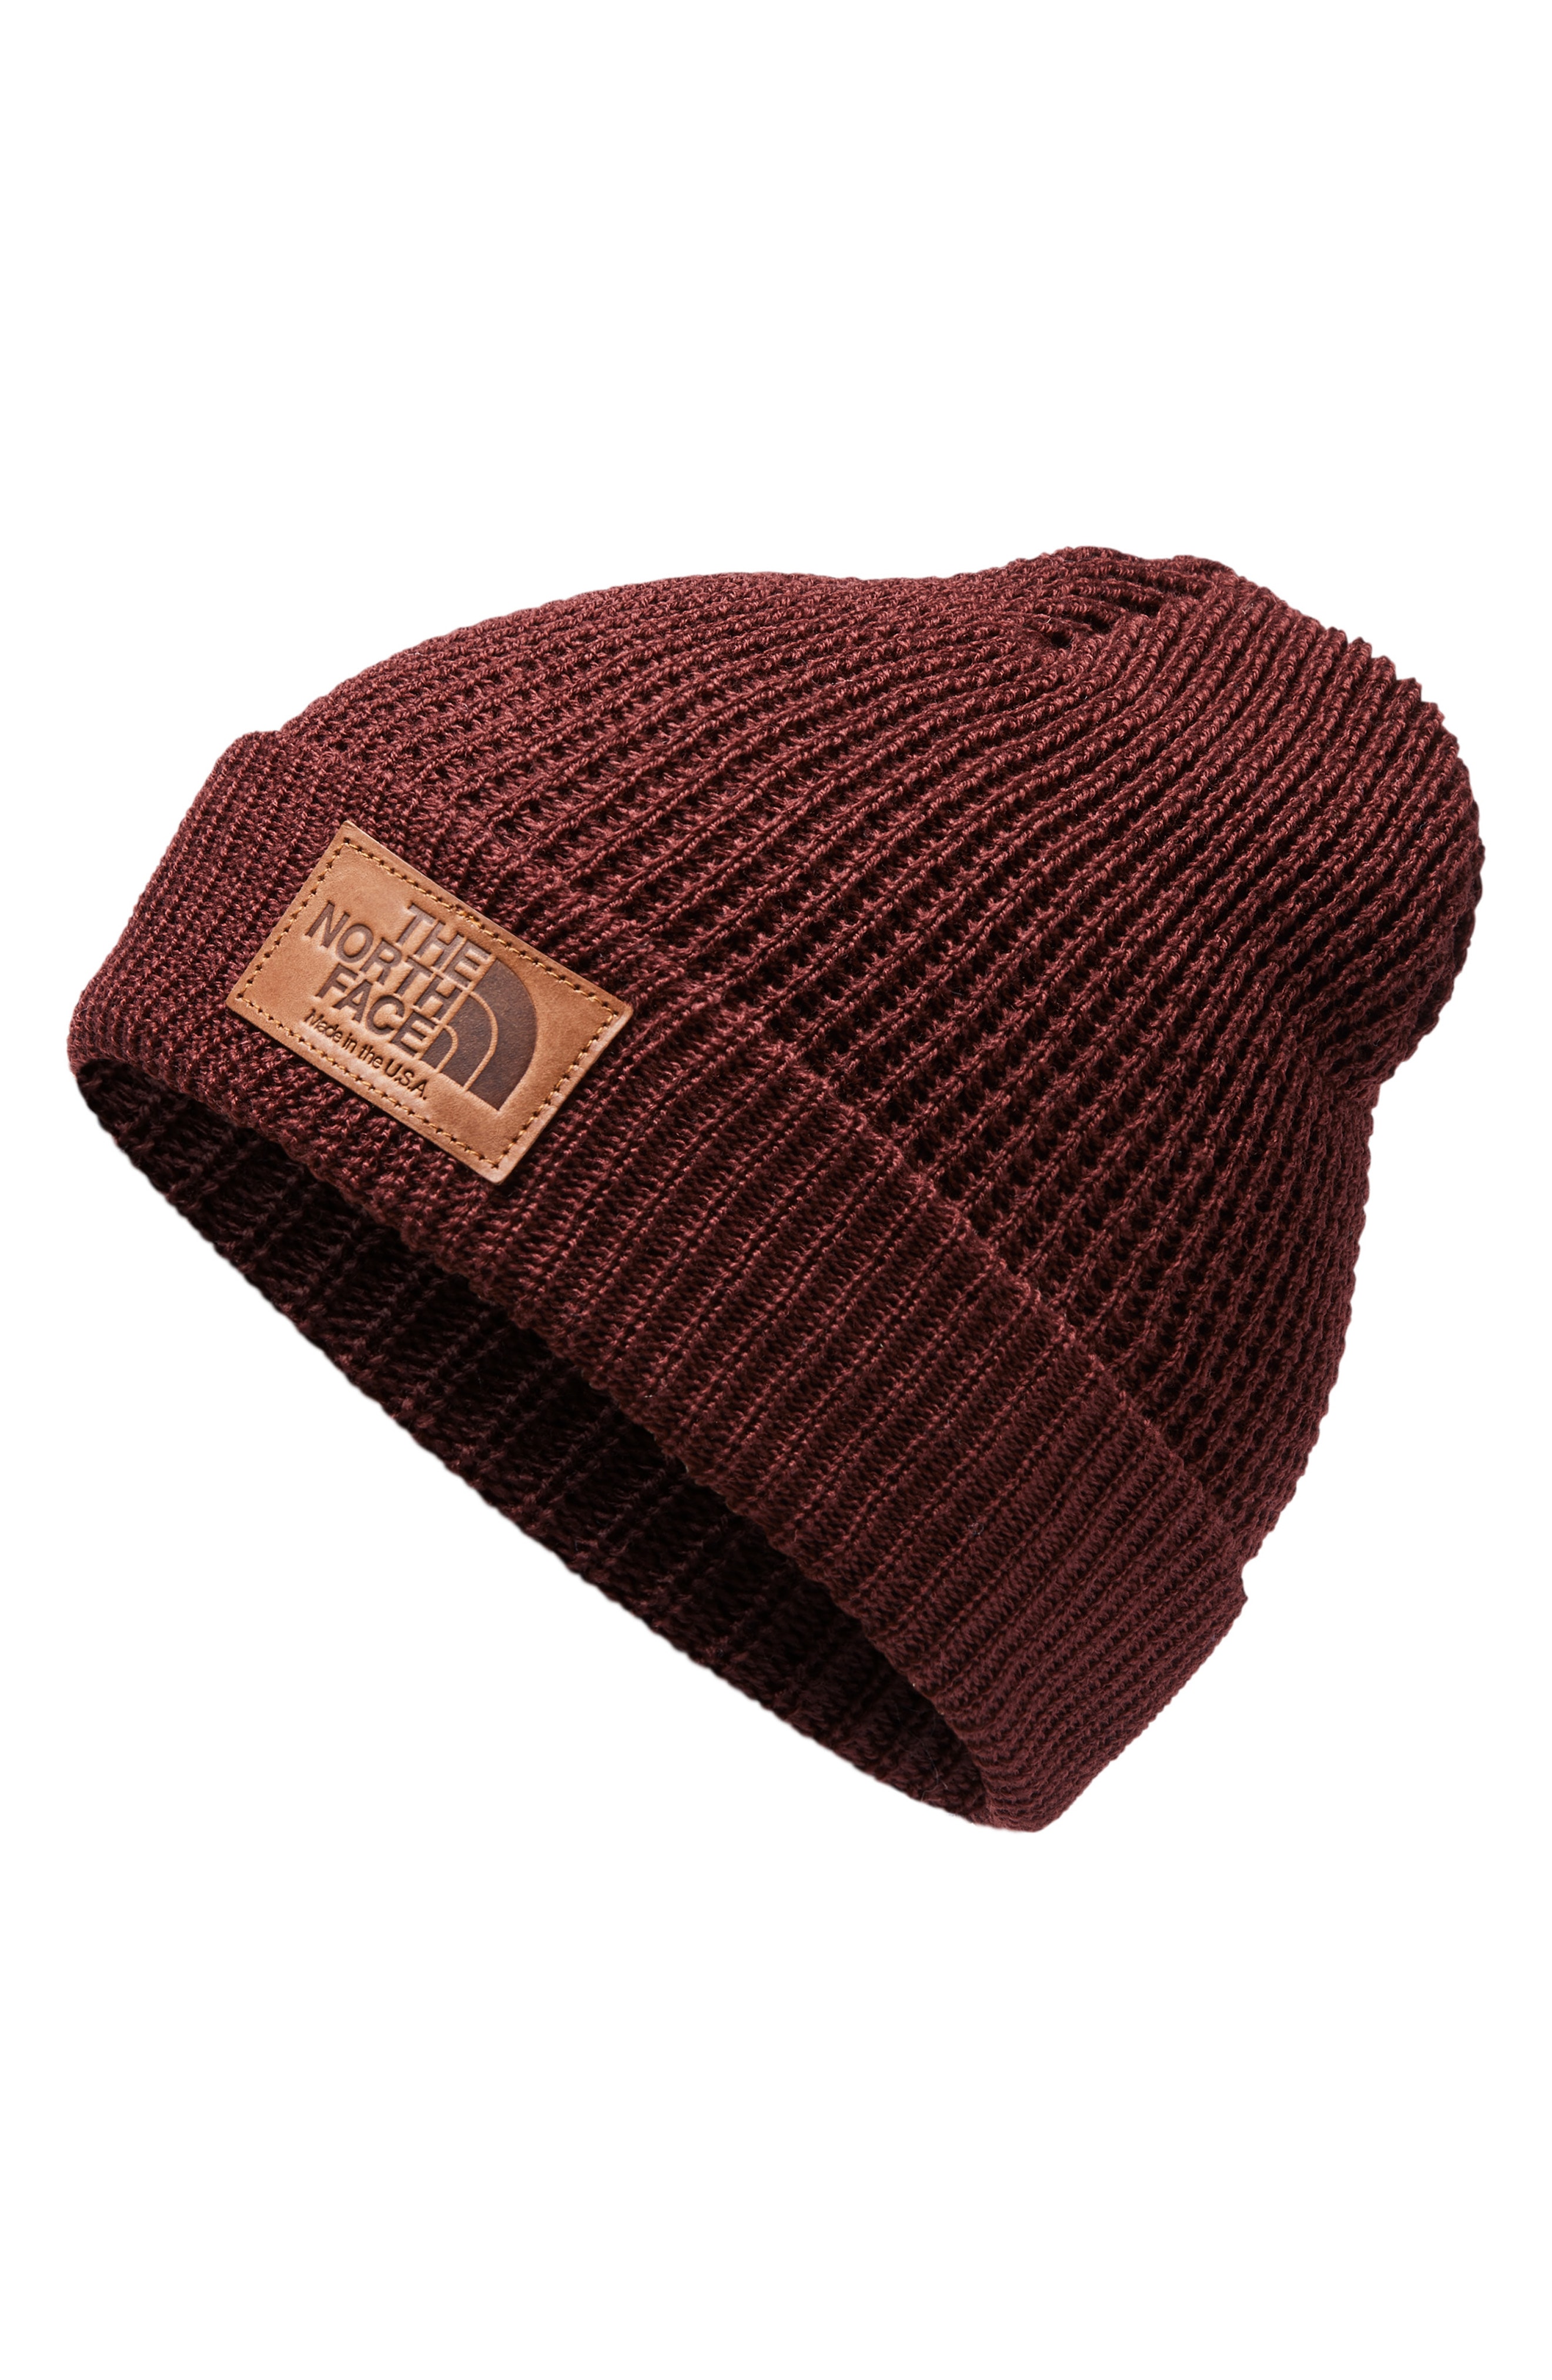 The North Face Made in the USA Wool Beanie